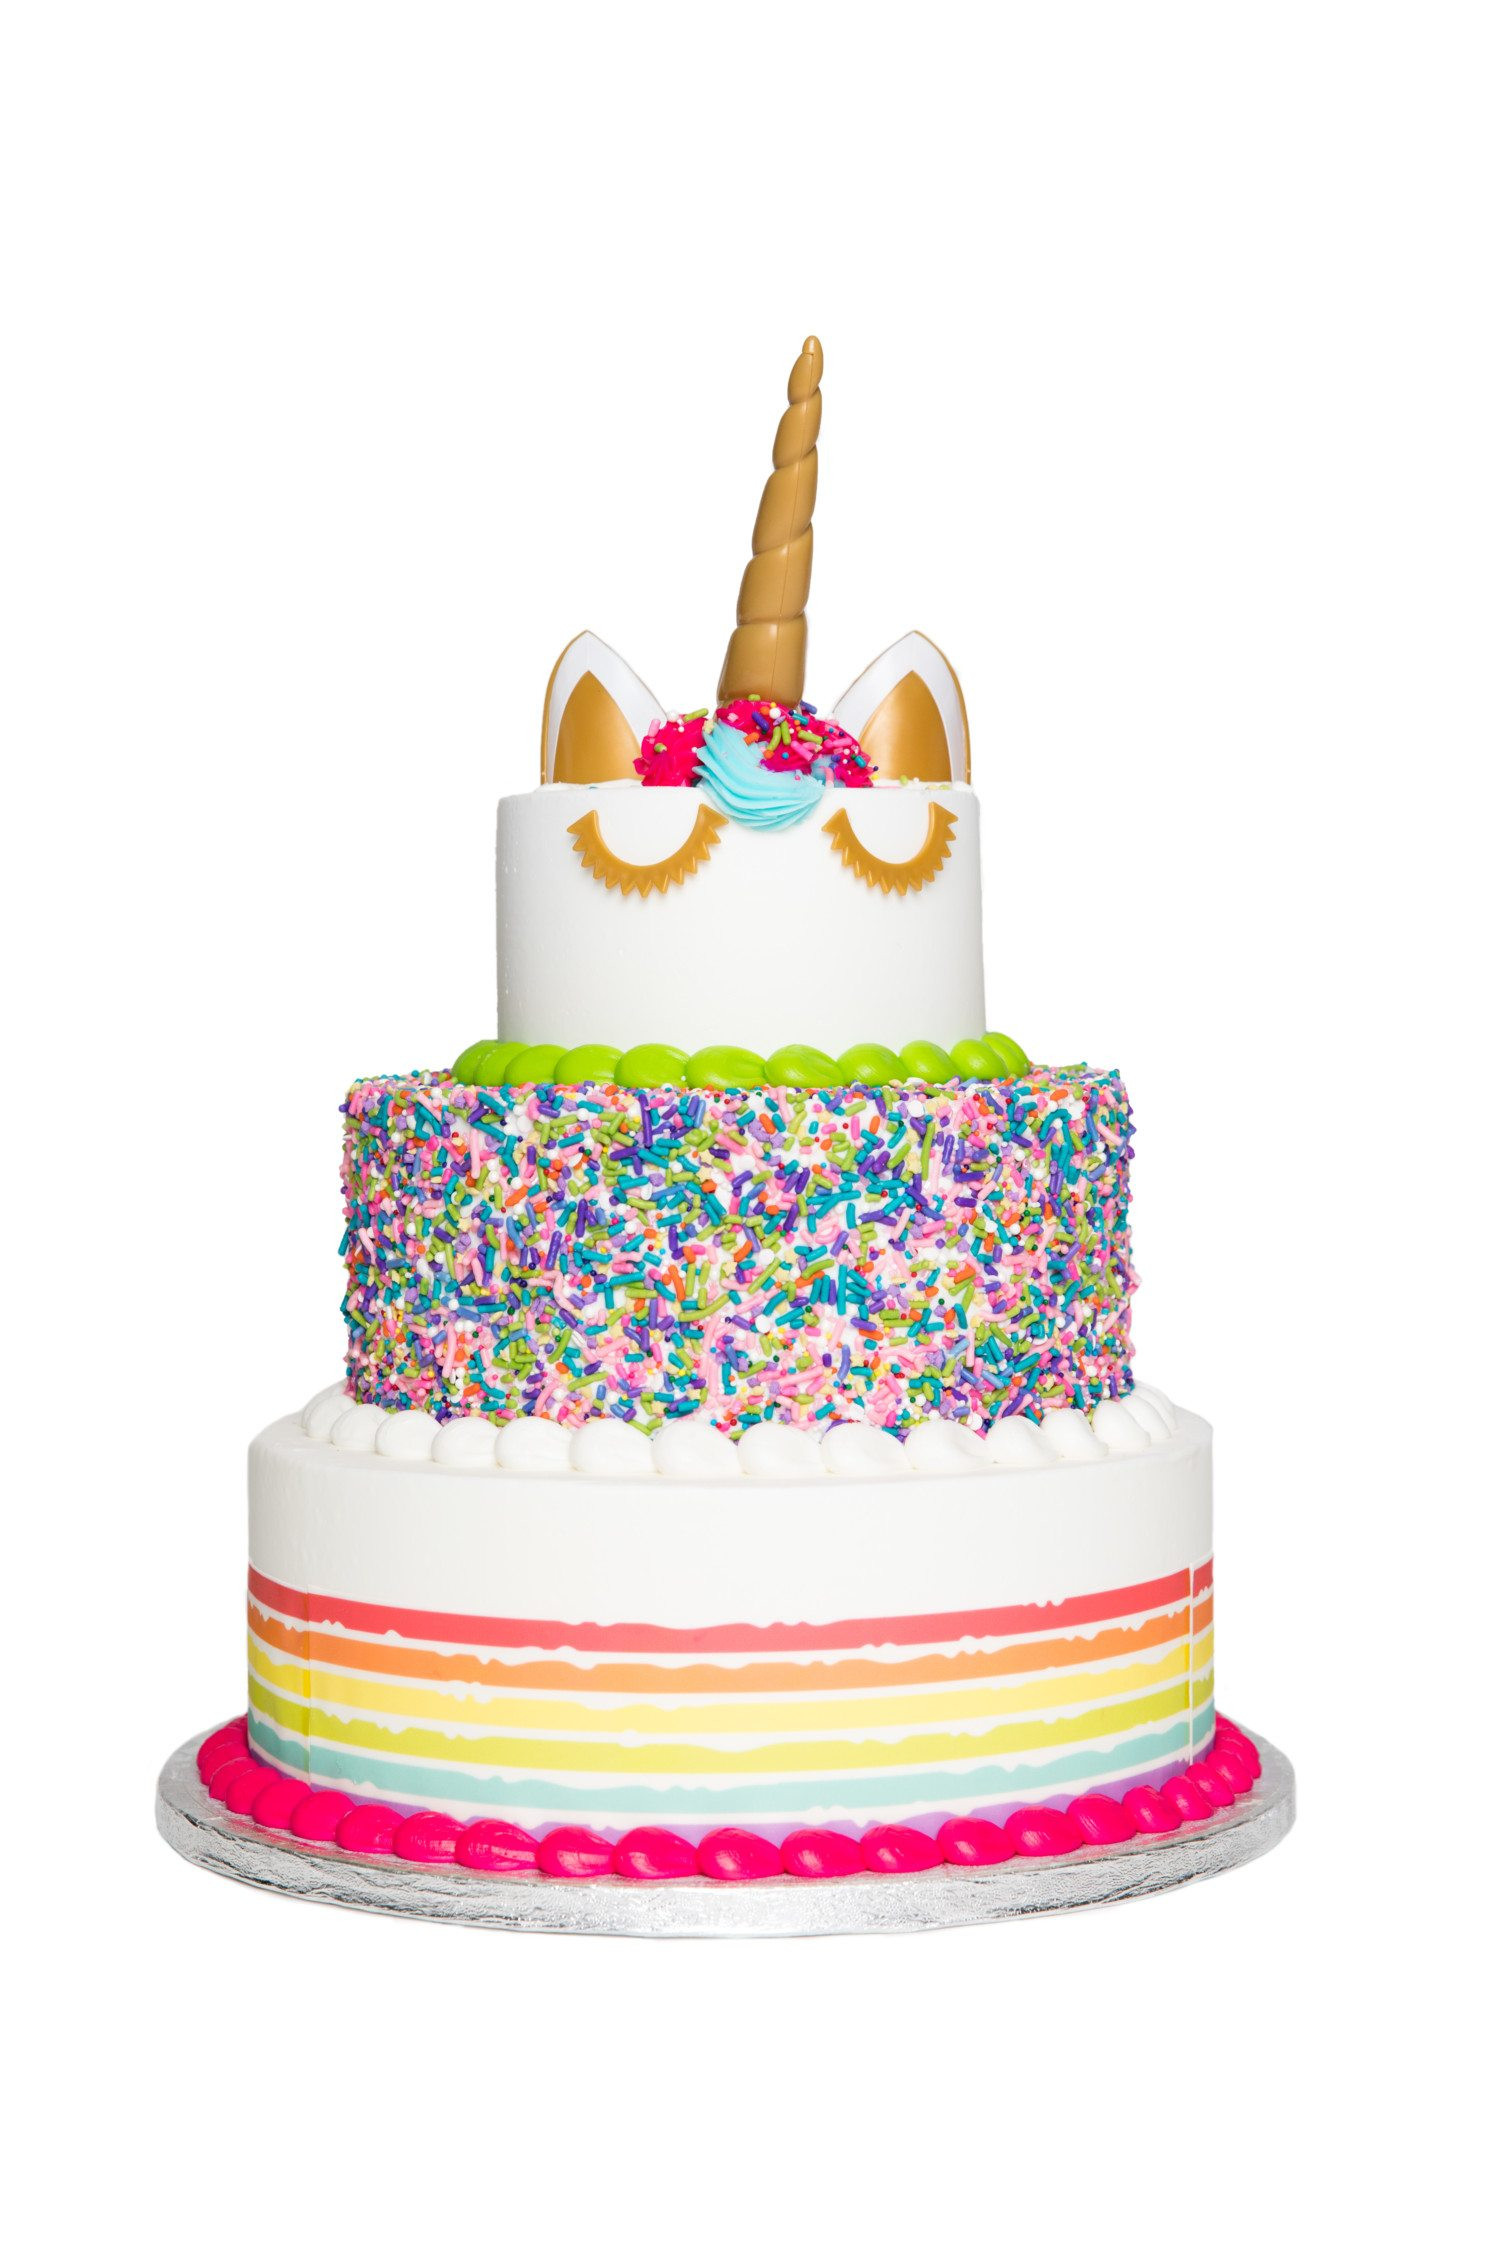 Sams Club Birthday Cakes
 You Can Buy This Giant Unicorn Cake From Sam’s Club For